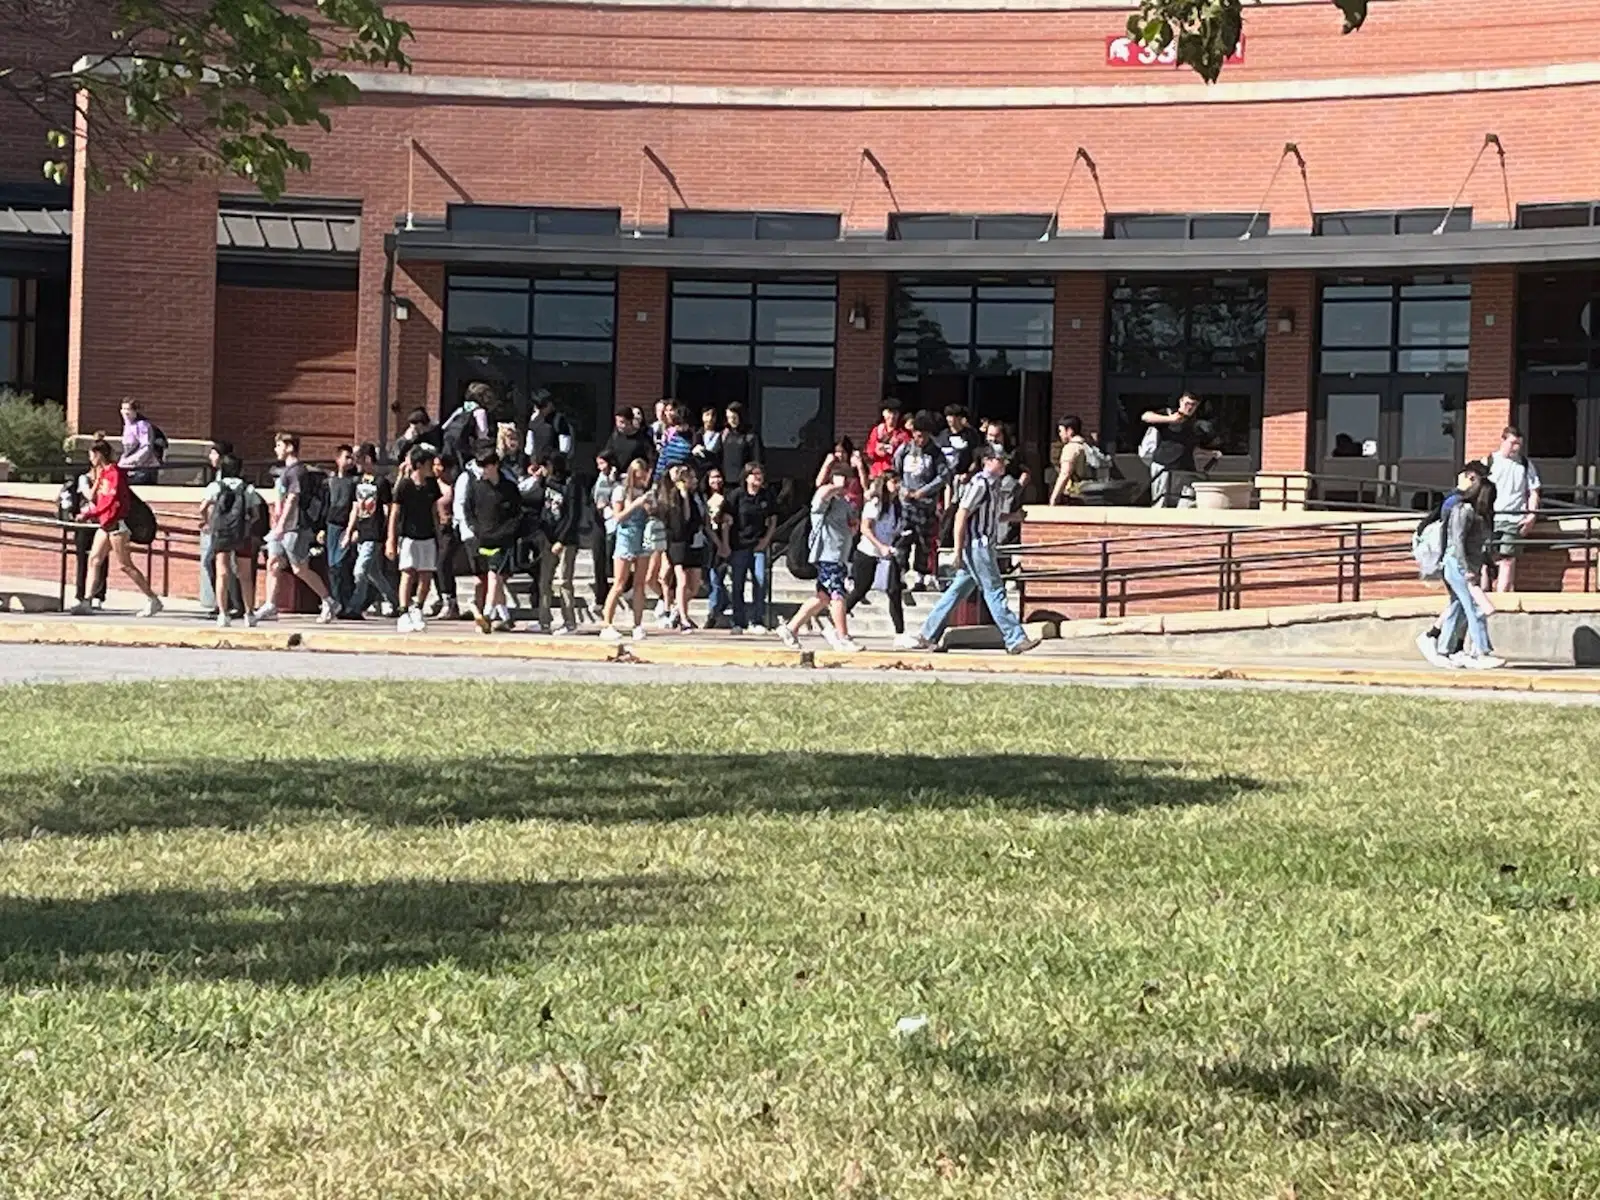 UPDATE: Threat ruled not credible following three-hour lockdowns at trio of USD 253 school buildings Tuesday